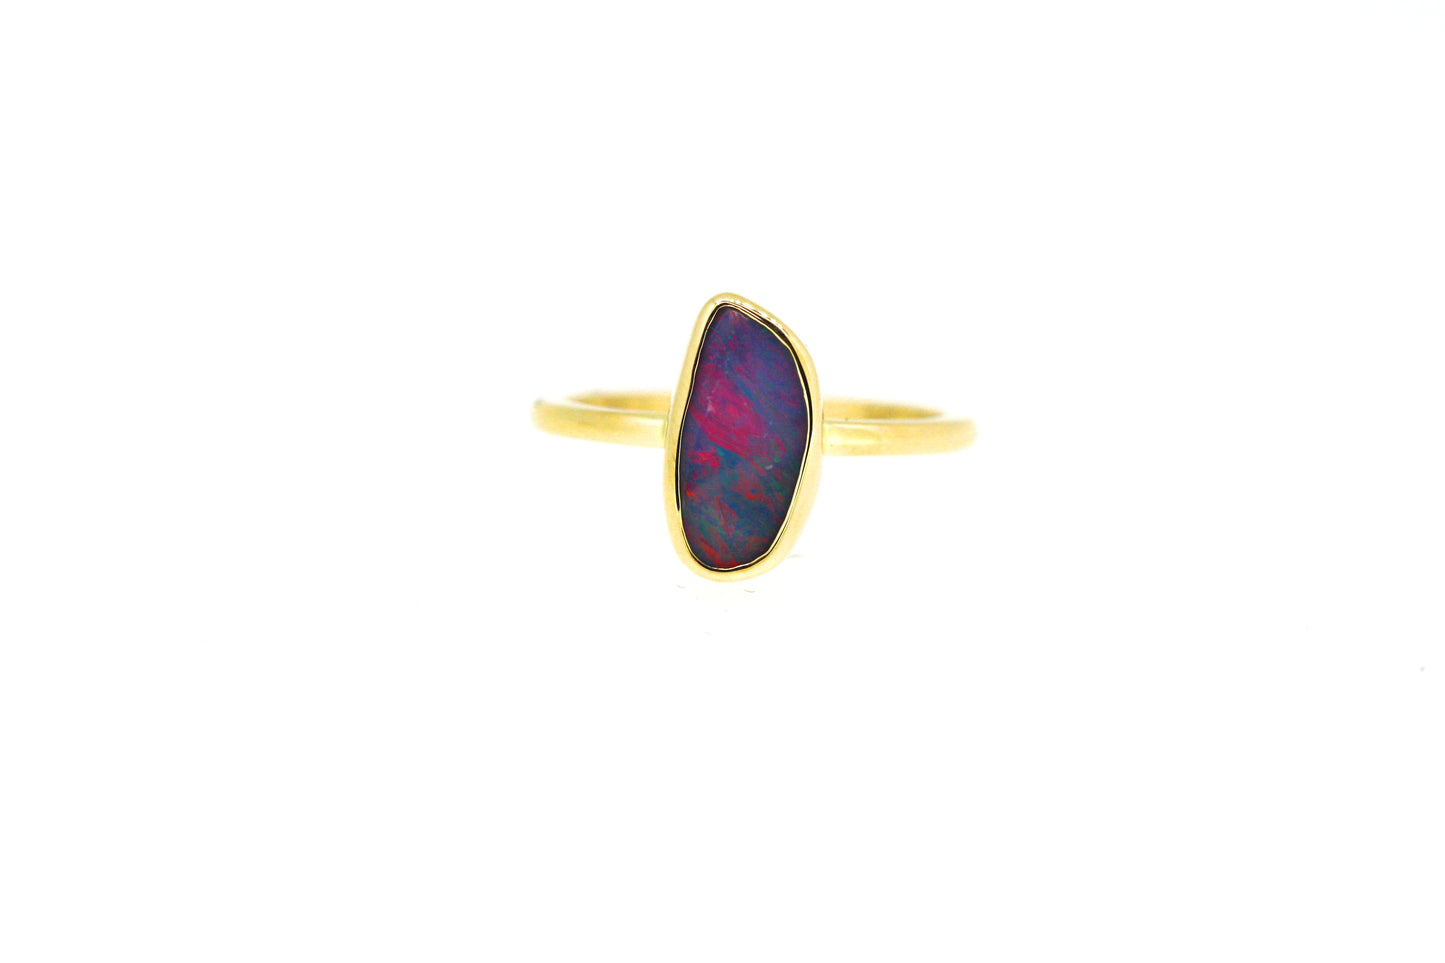 UPDATE: Queensland Boulder Opal and 14ct Yellow Gold Ring